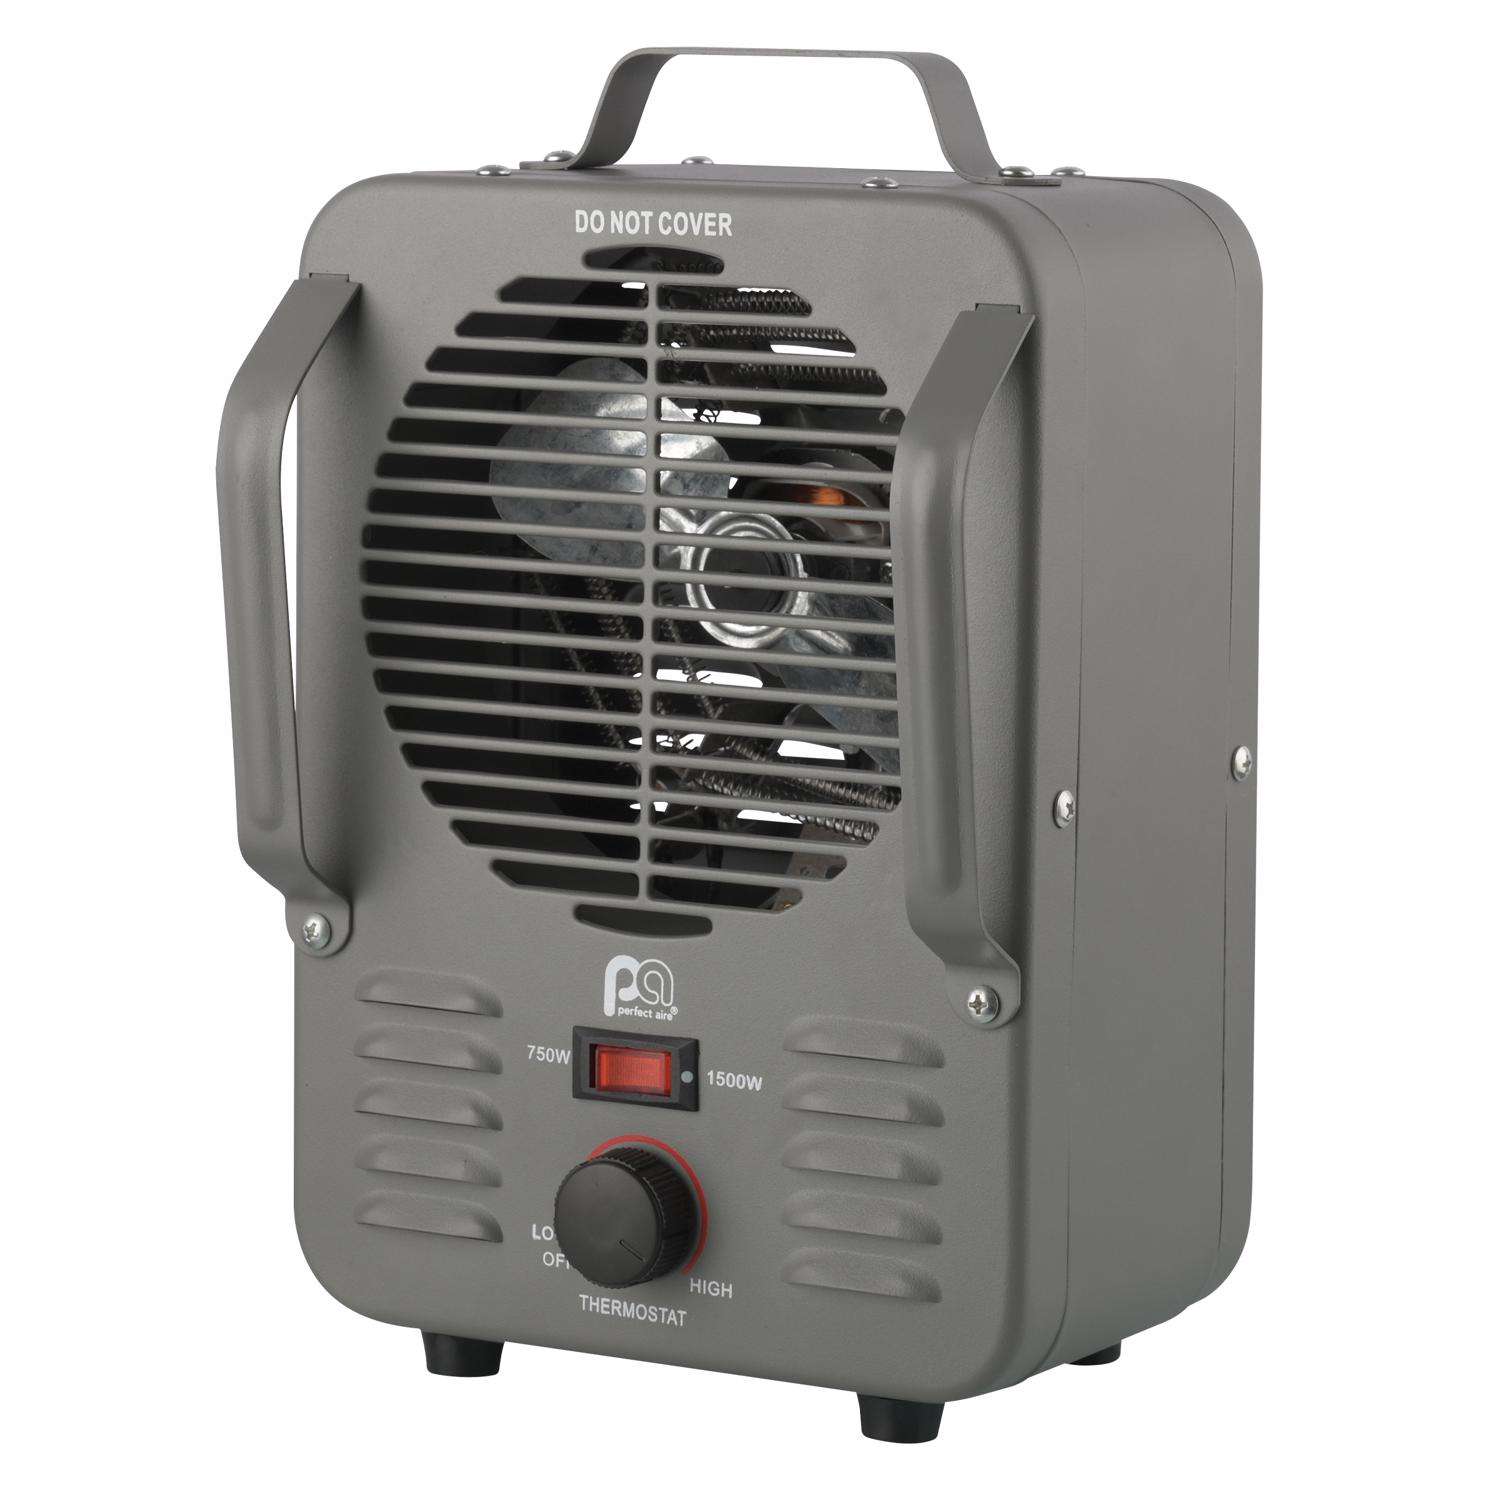 Best Pump House & Well House Utility Heater for sale in Lake Ozark